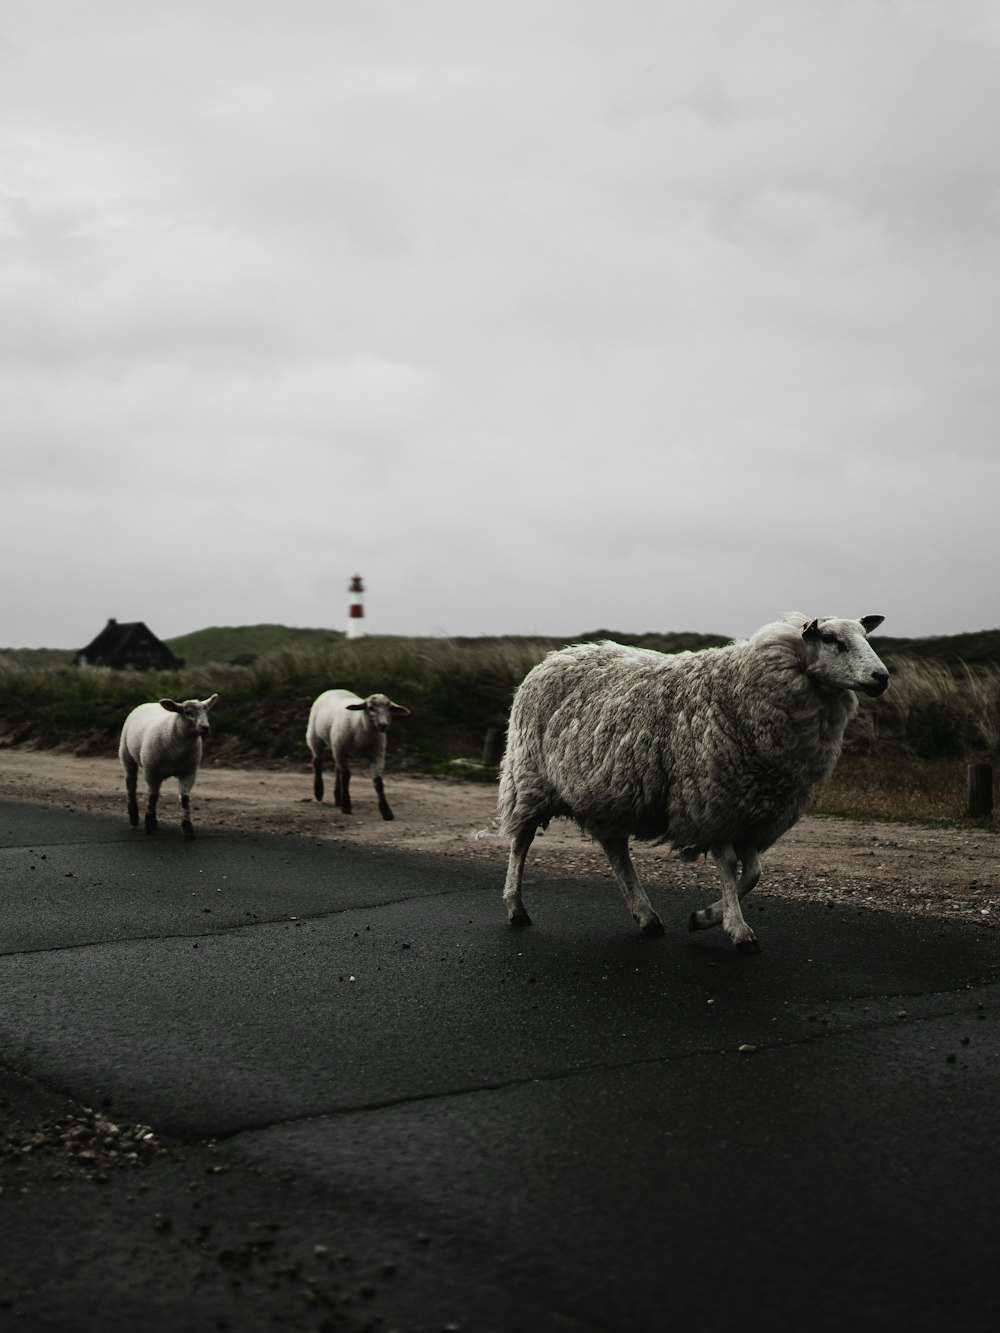 herd of sheep on gray asphalt road under white cloudy sky during daytime